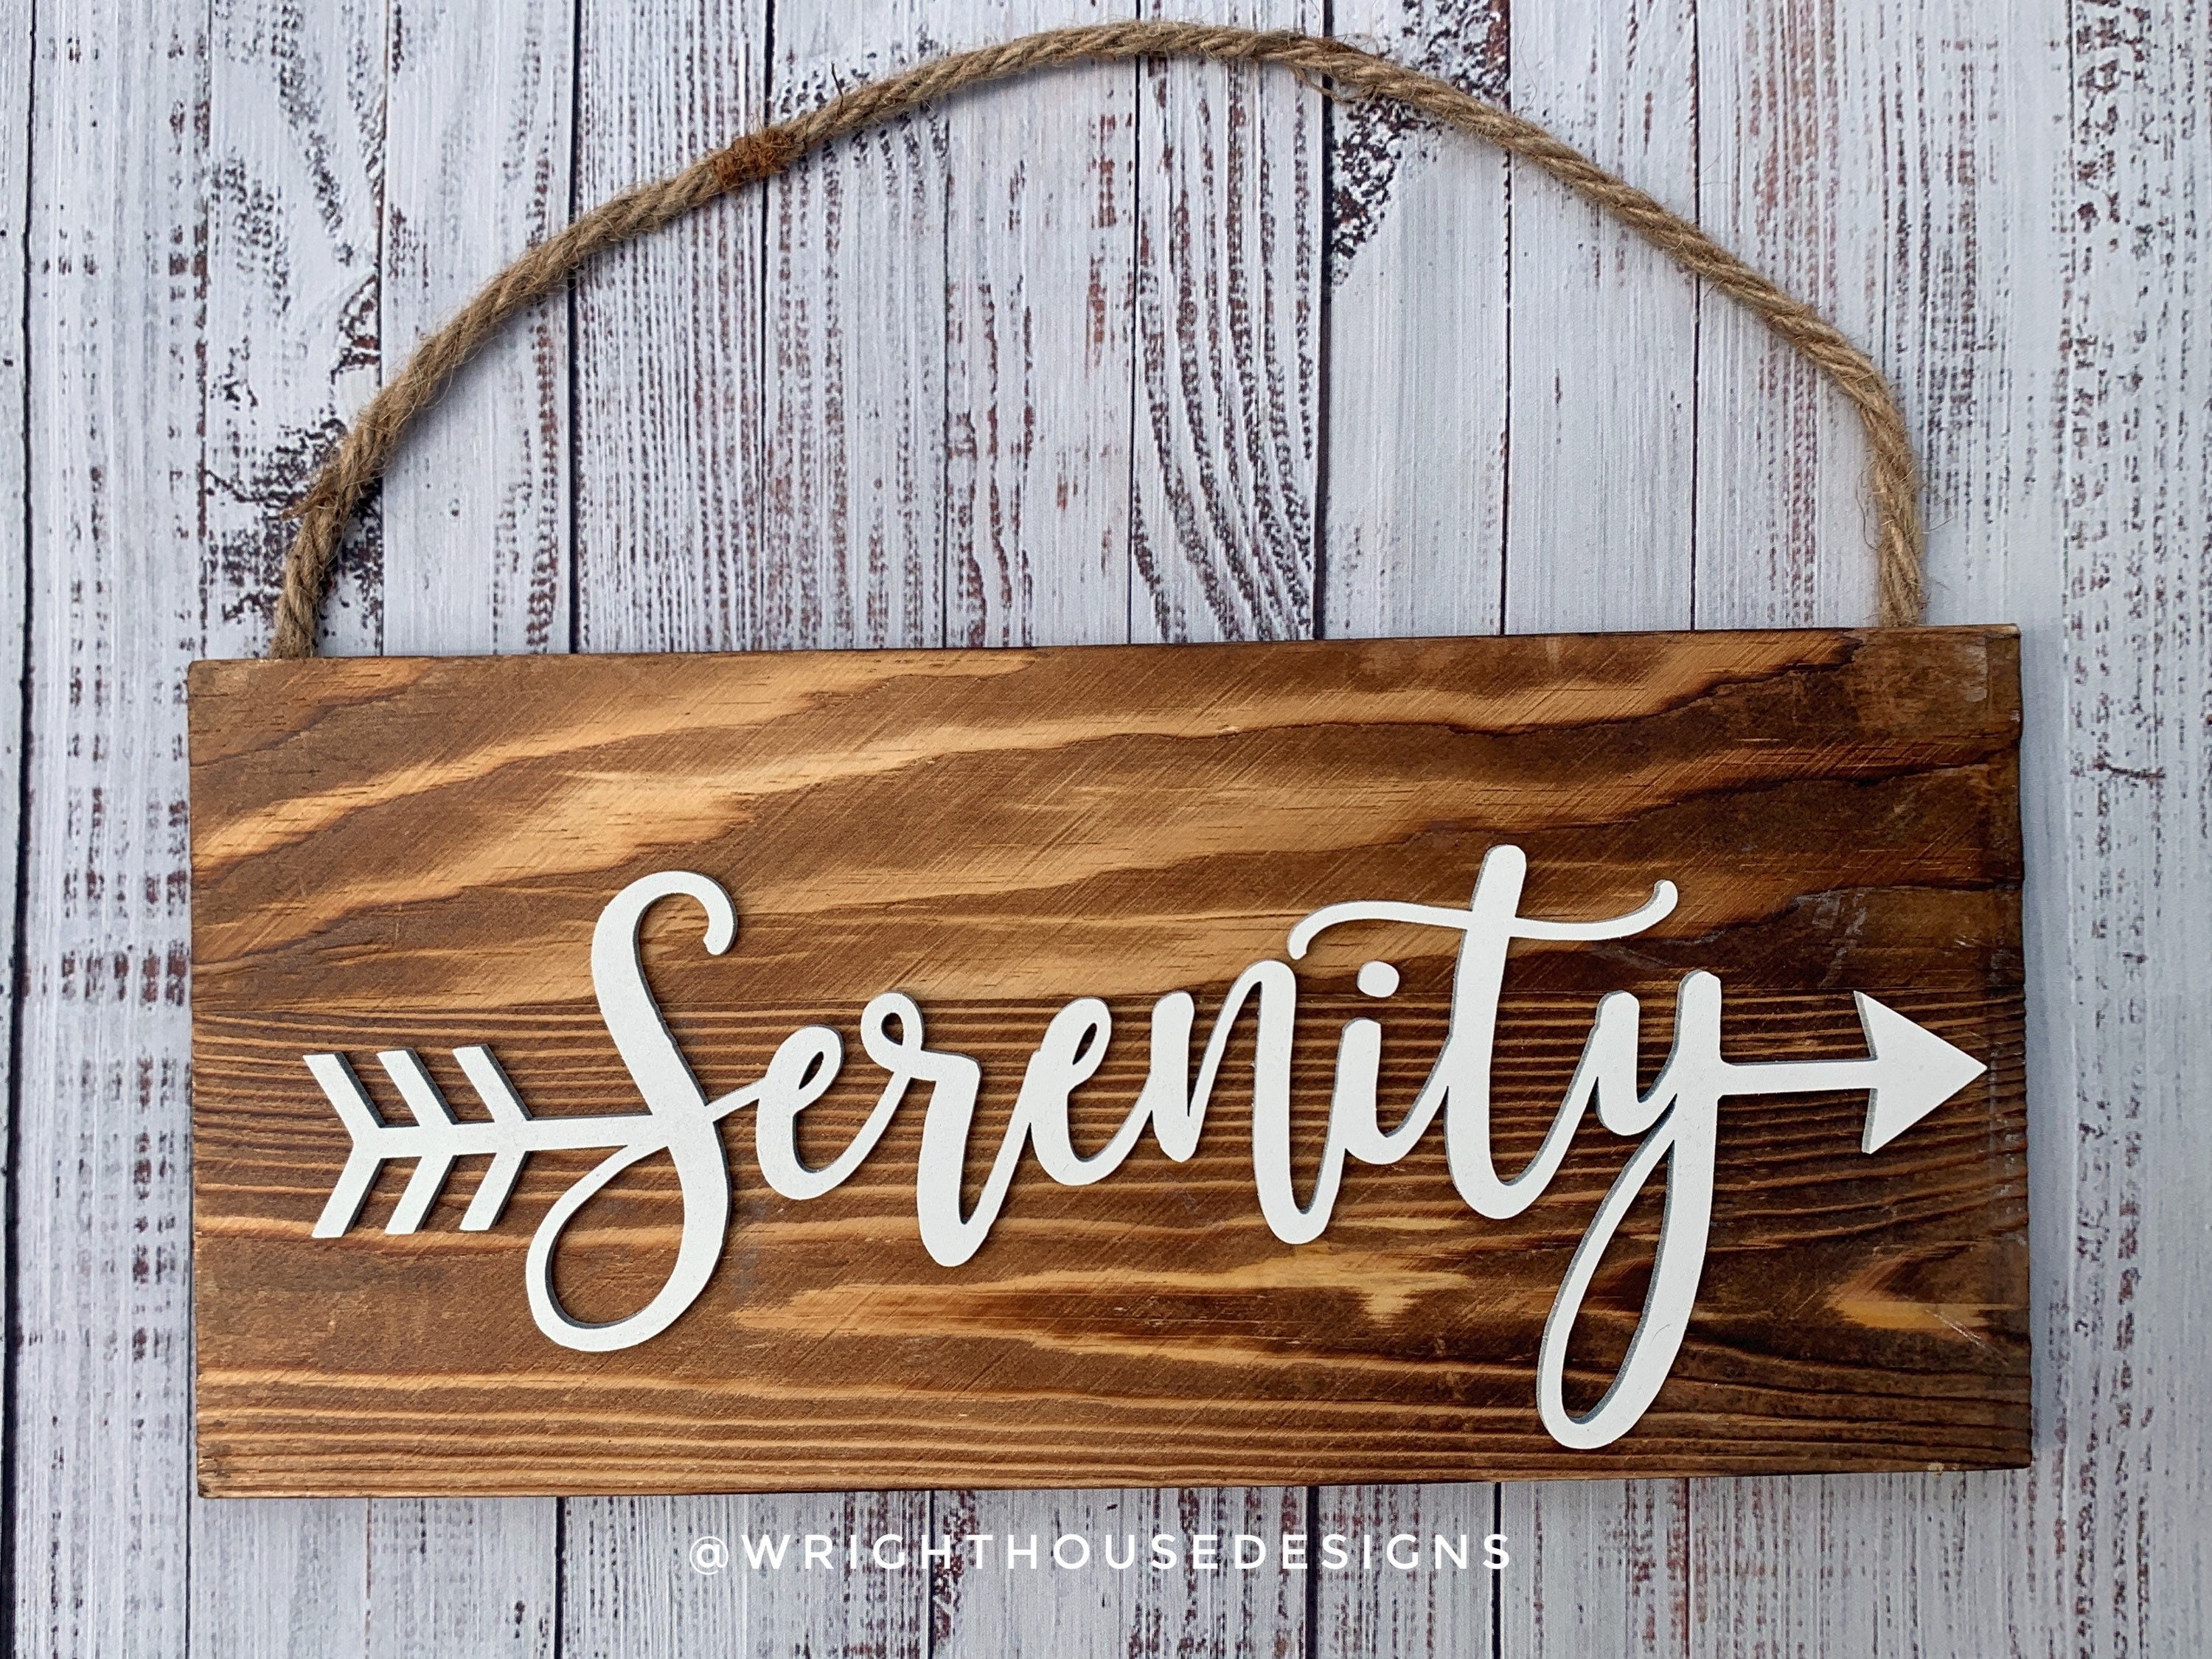 Serenity Arrow Word Art - Rustic Farmhouse - Reclaimed Pallet Plank Board Sign - Wooden Wall Art - Bookshelf Decor and She Shed Signs